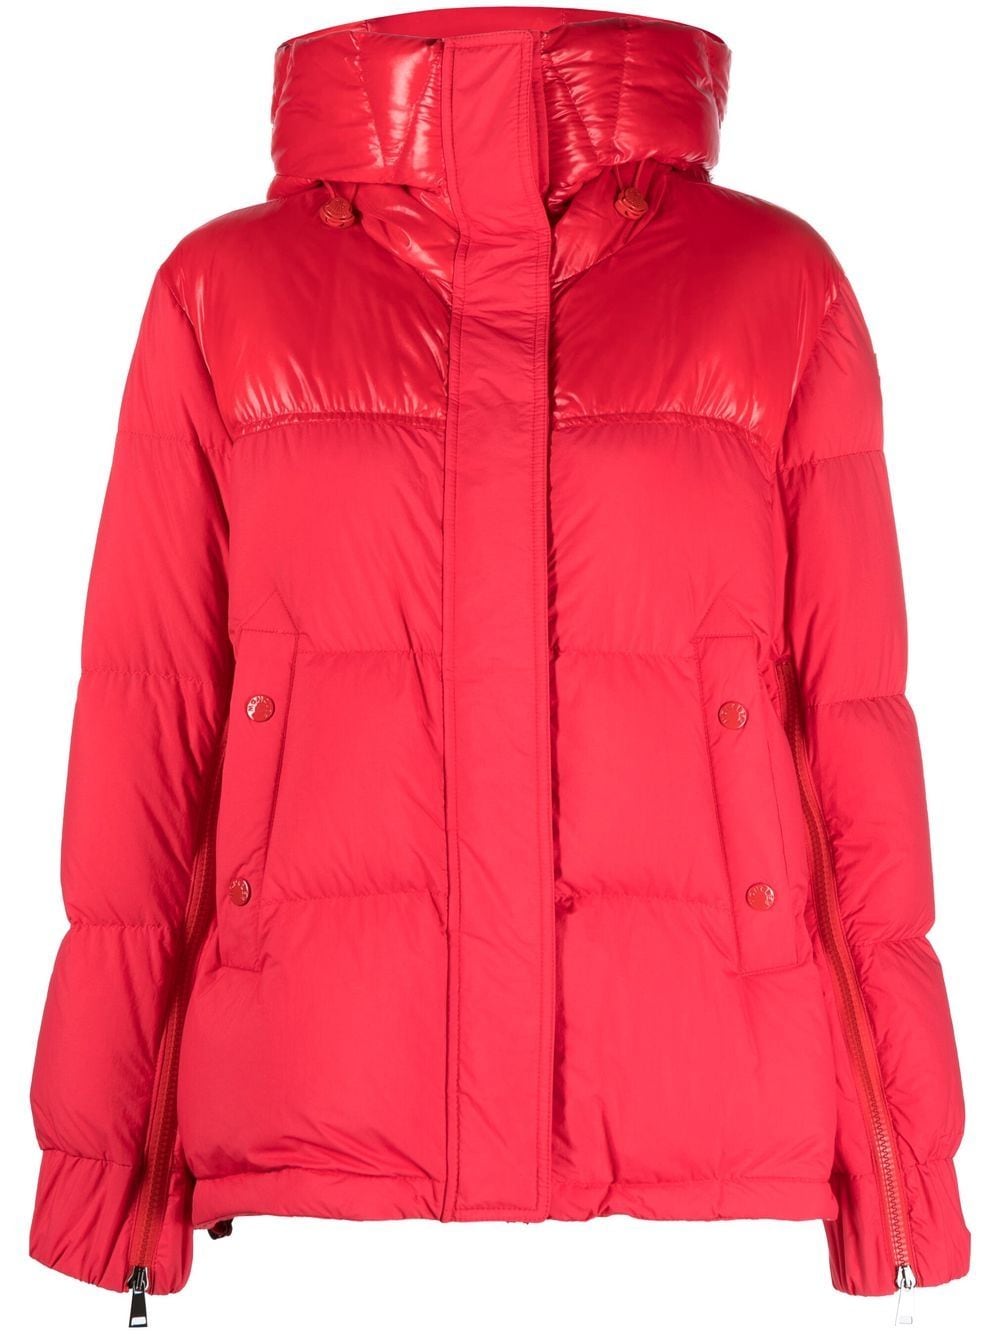 Moncler hooded puffer jacket - Red von Moncler